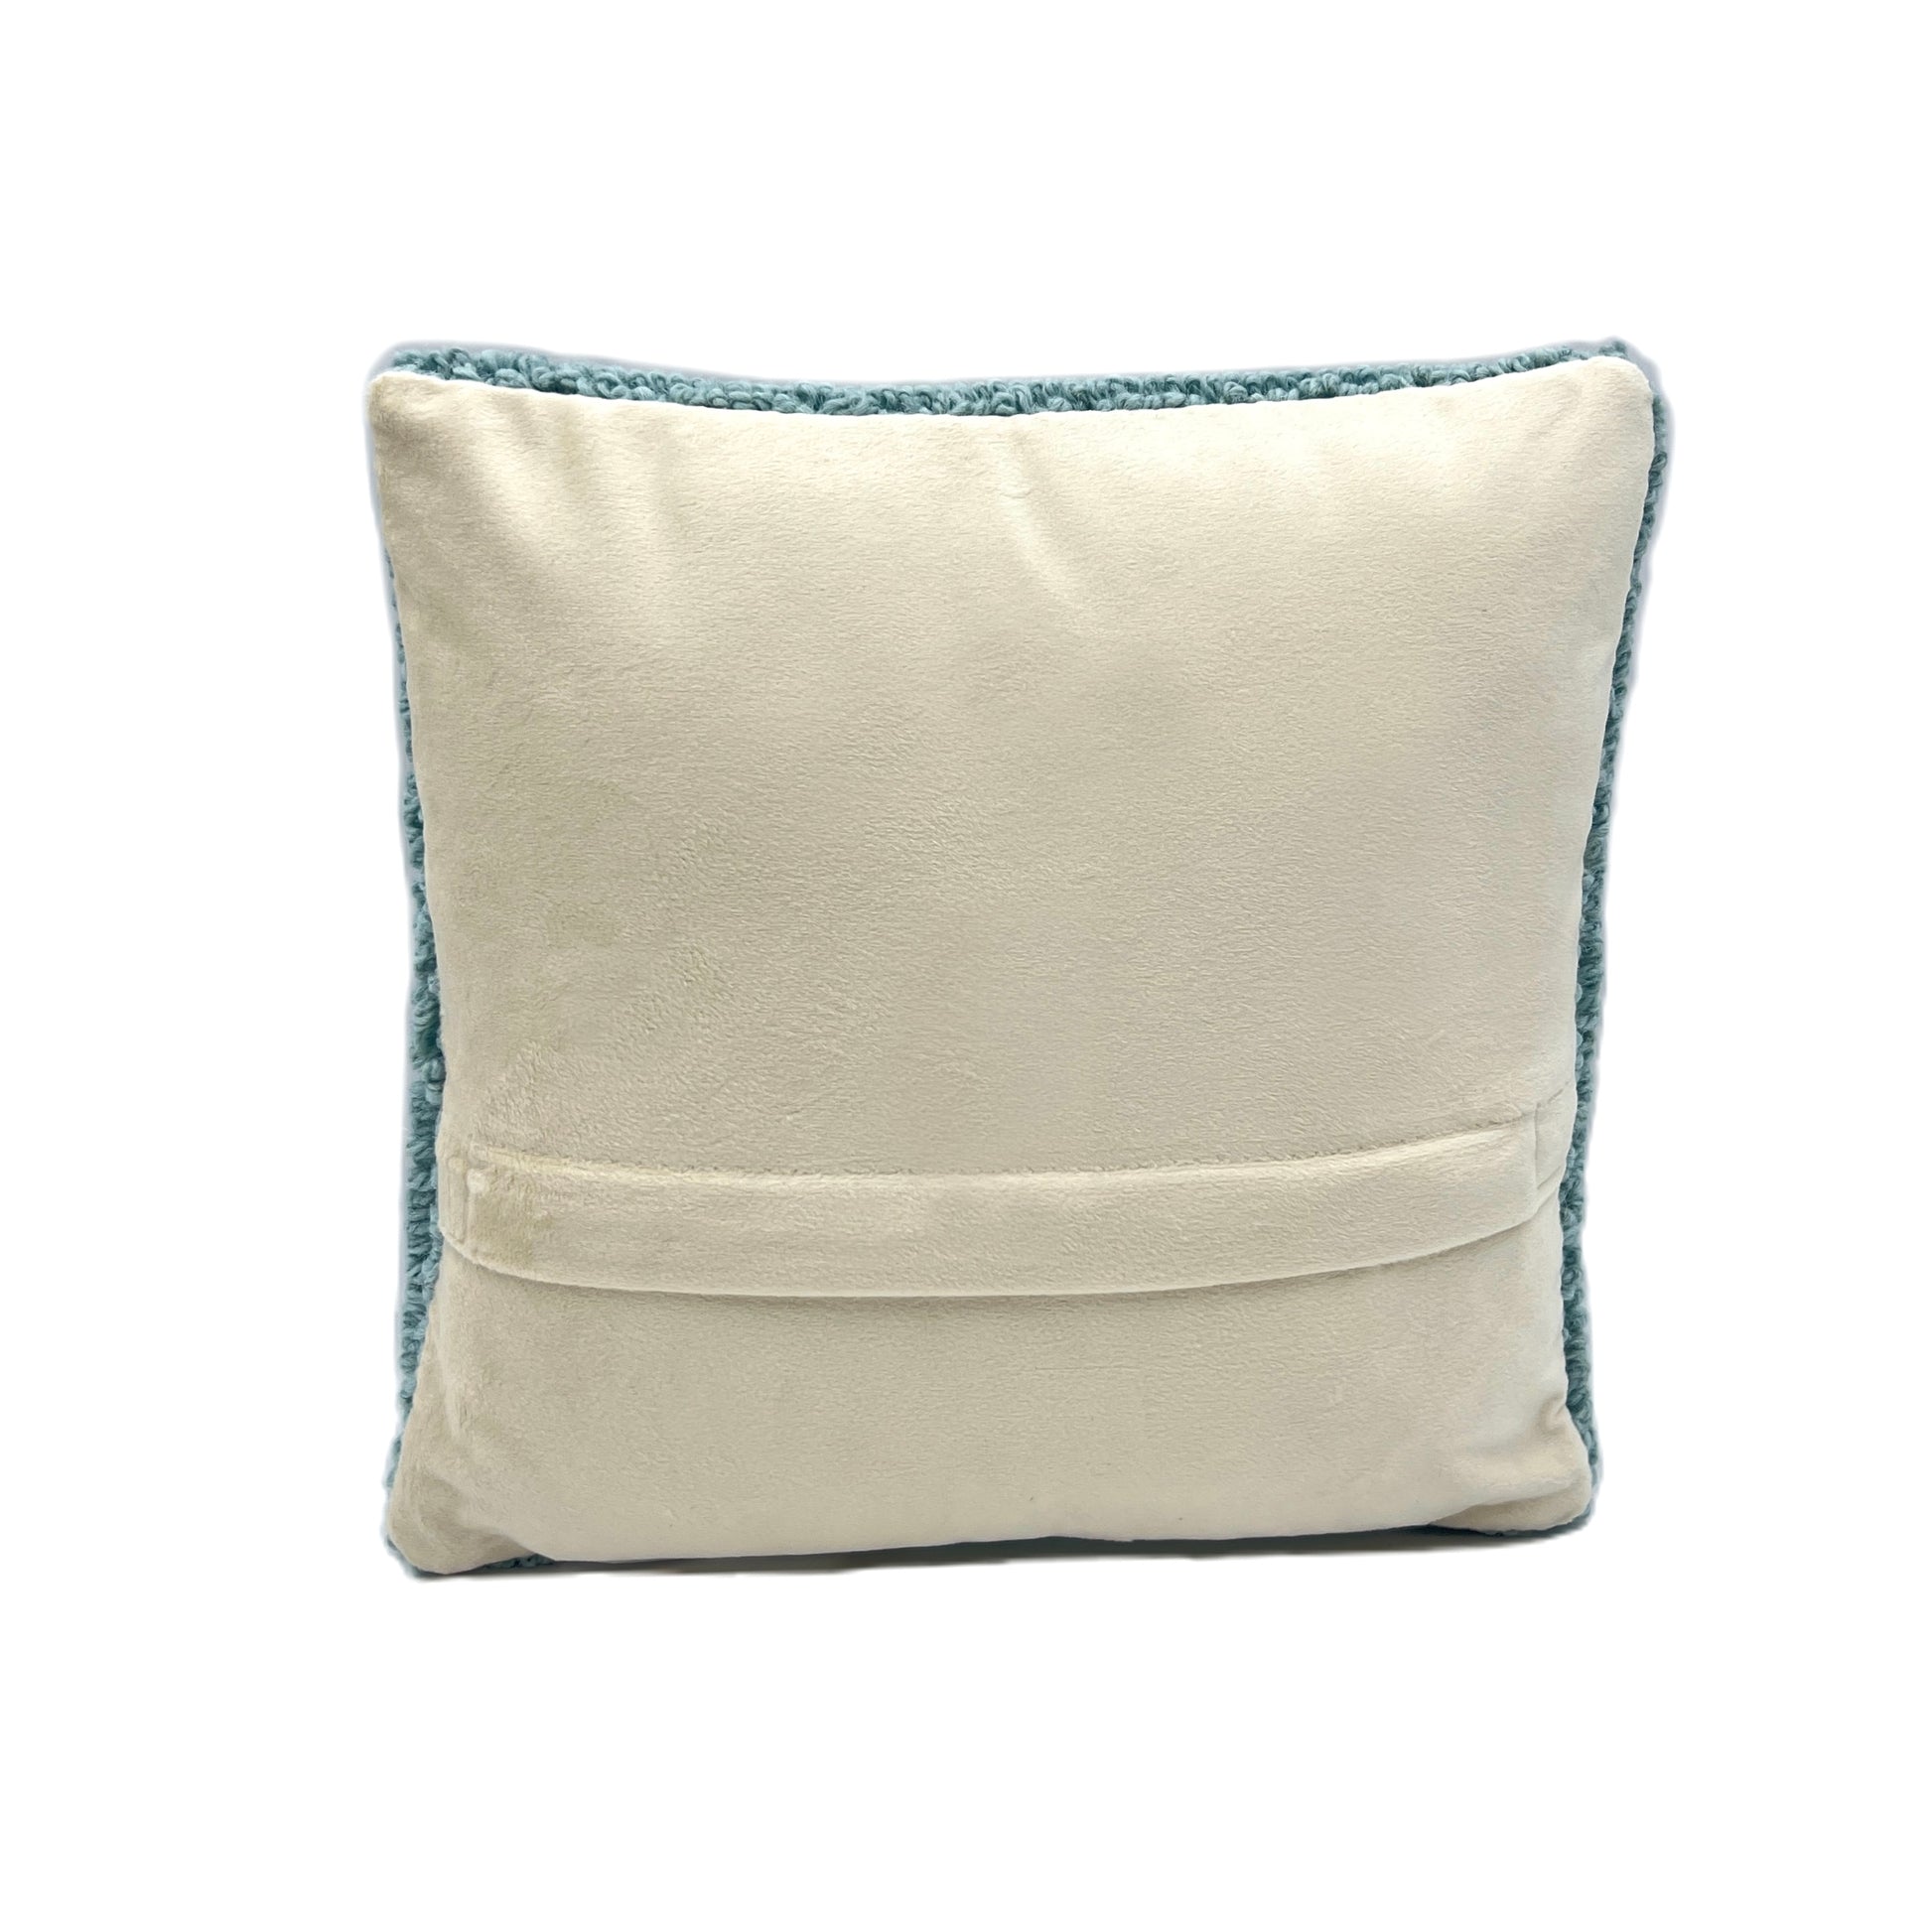 Lily of the Valley Wool Hooked Pillow Pillow 1818 Farms   